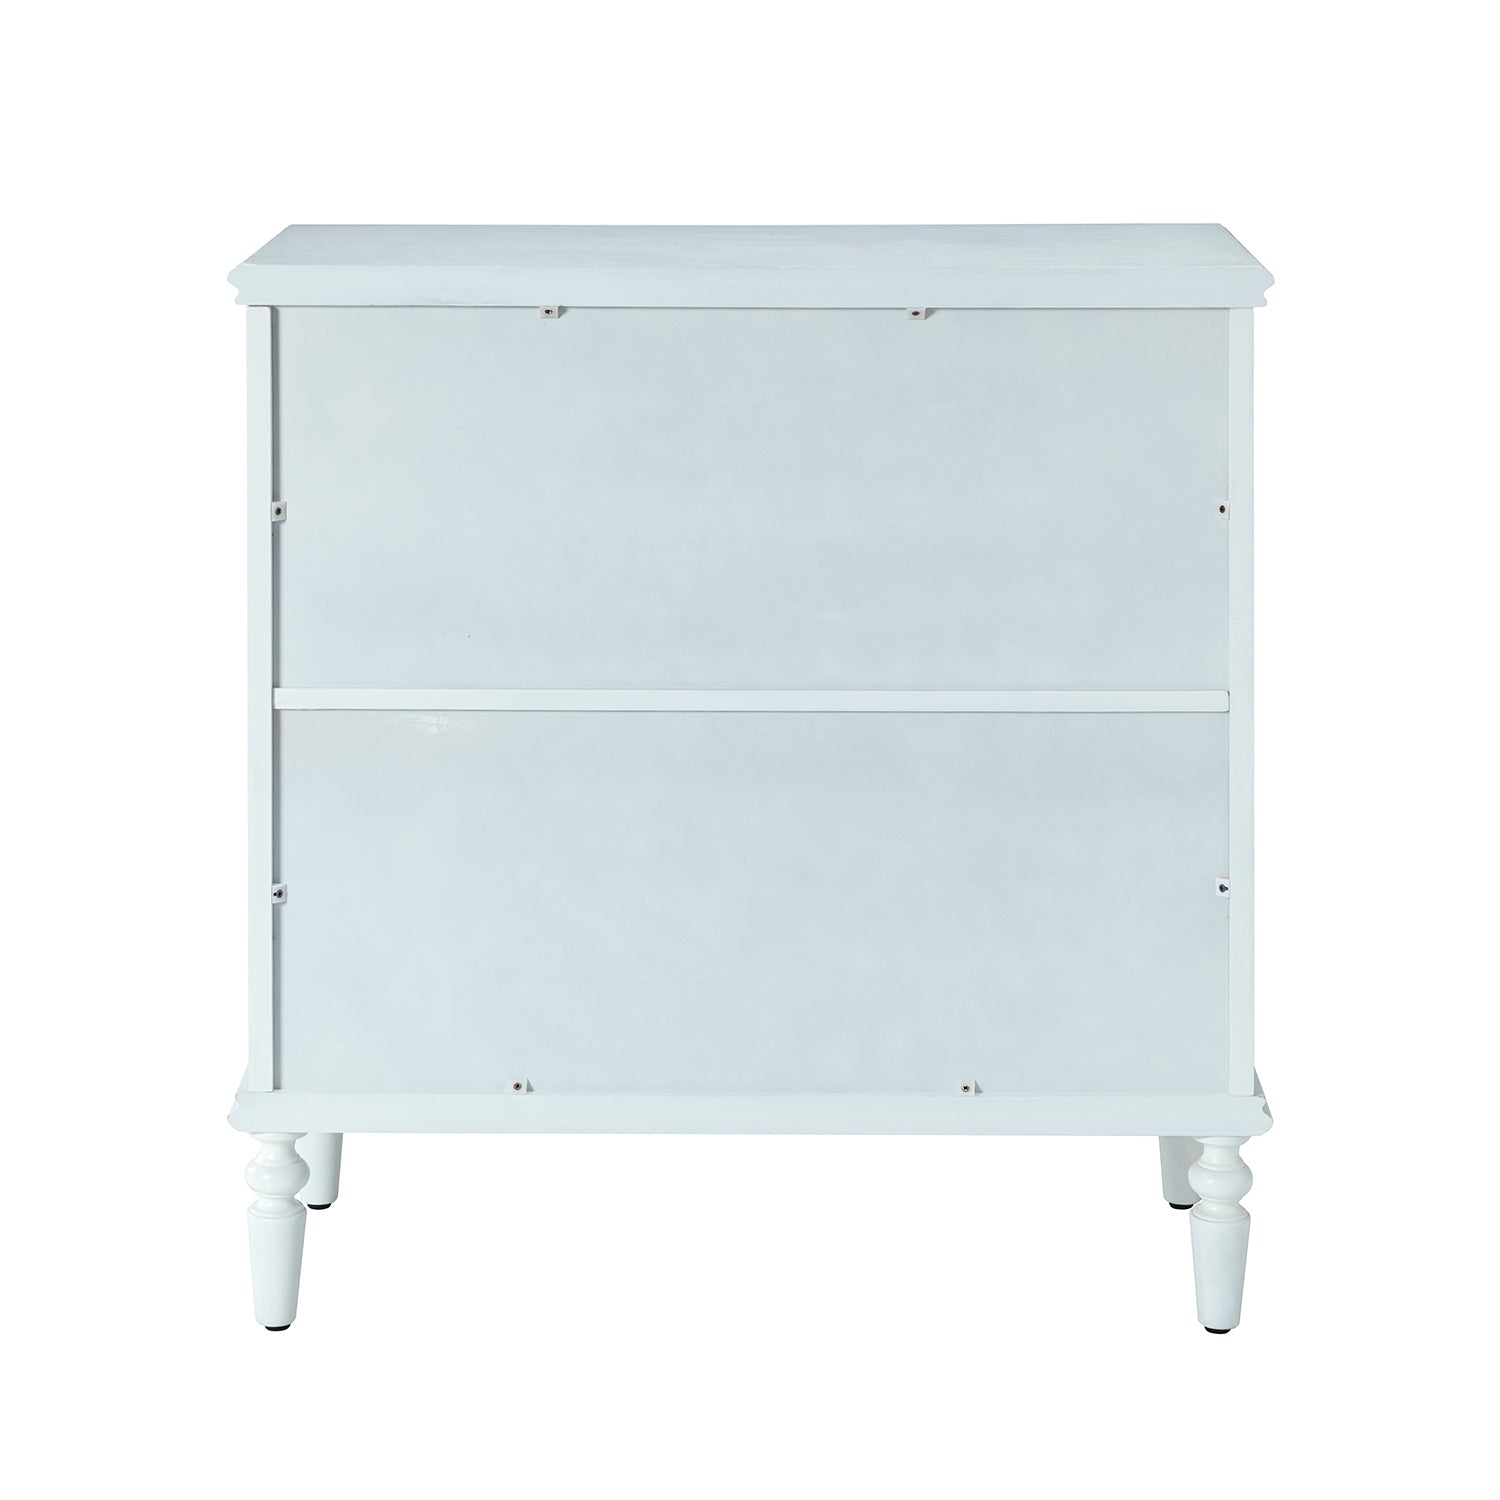 32" Tall 2-Door Accent Cabinet - White